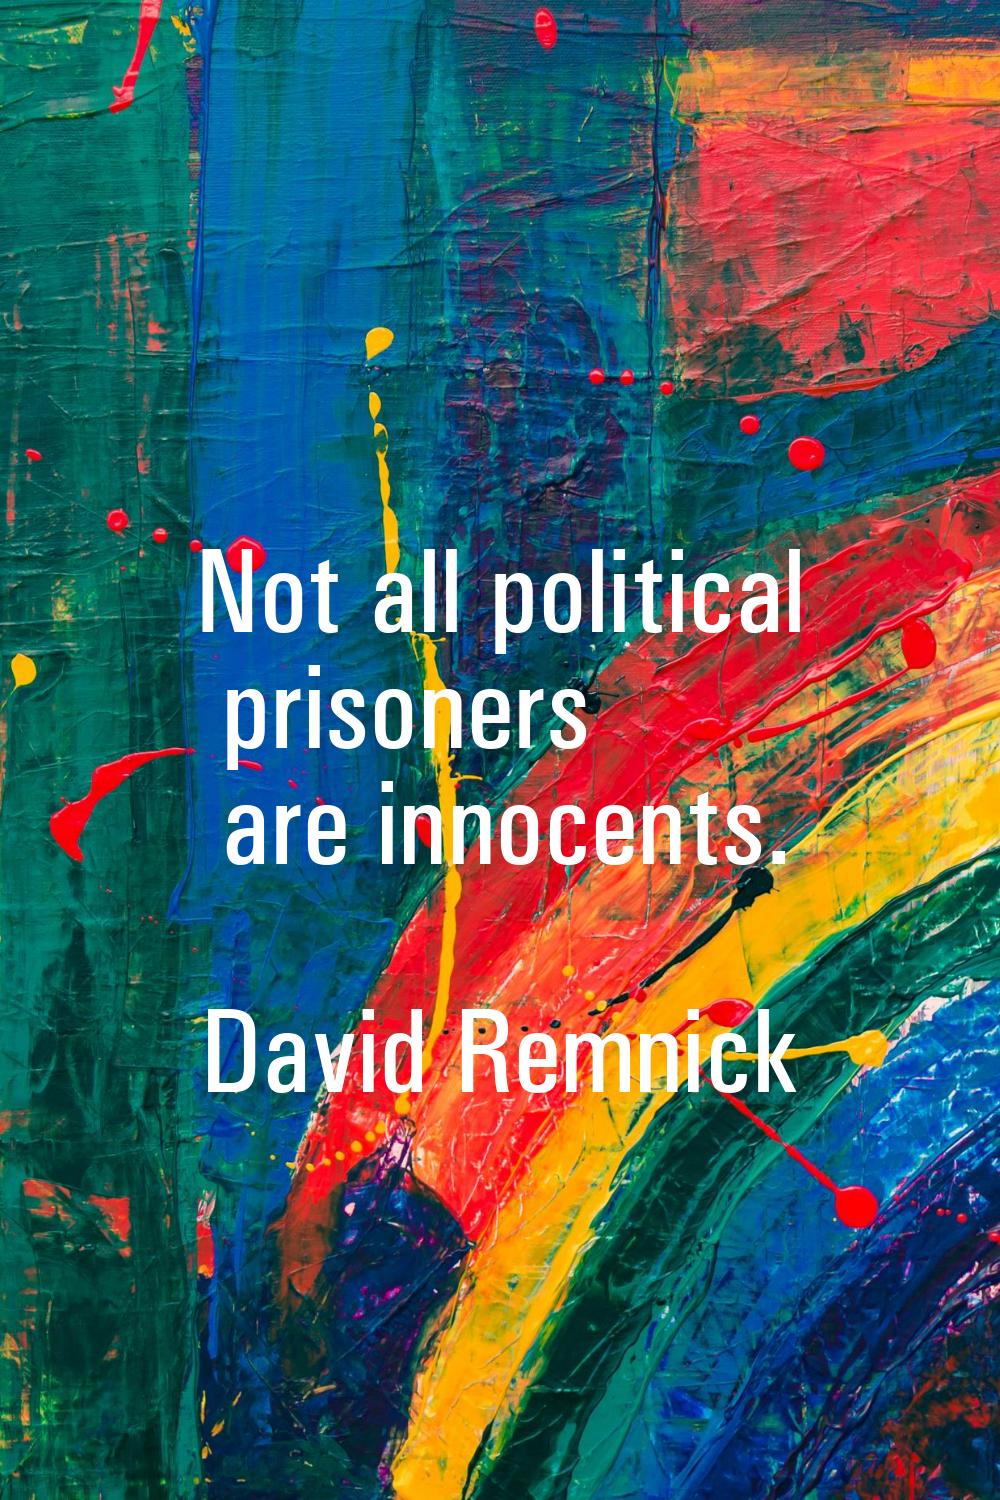 Not all political prisoners are innocents.